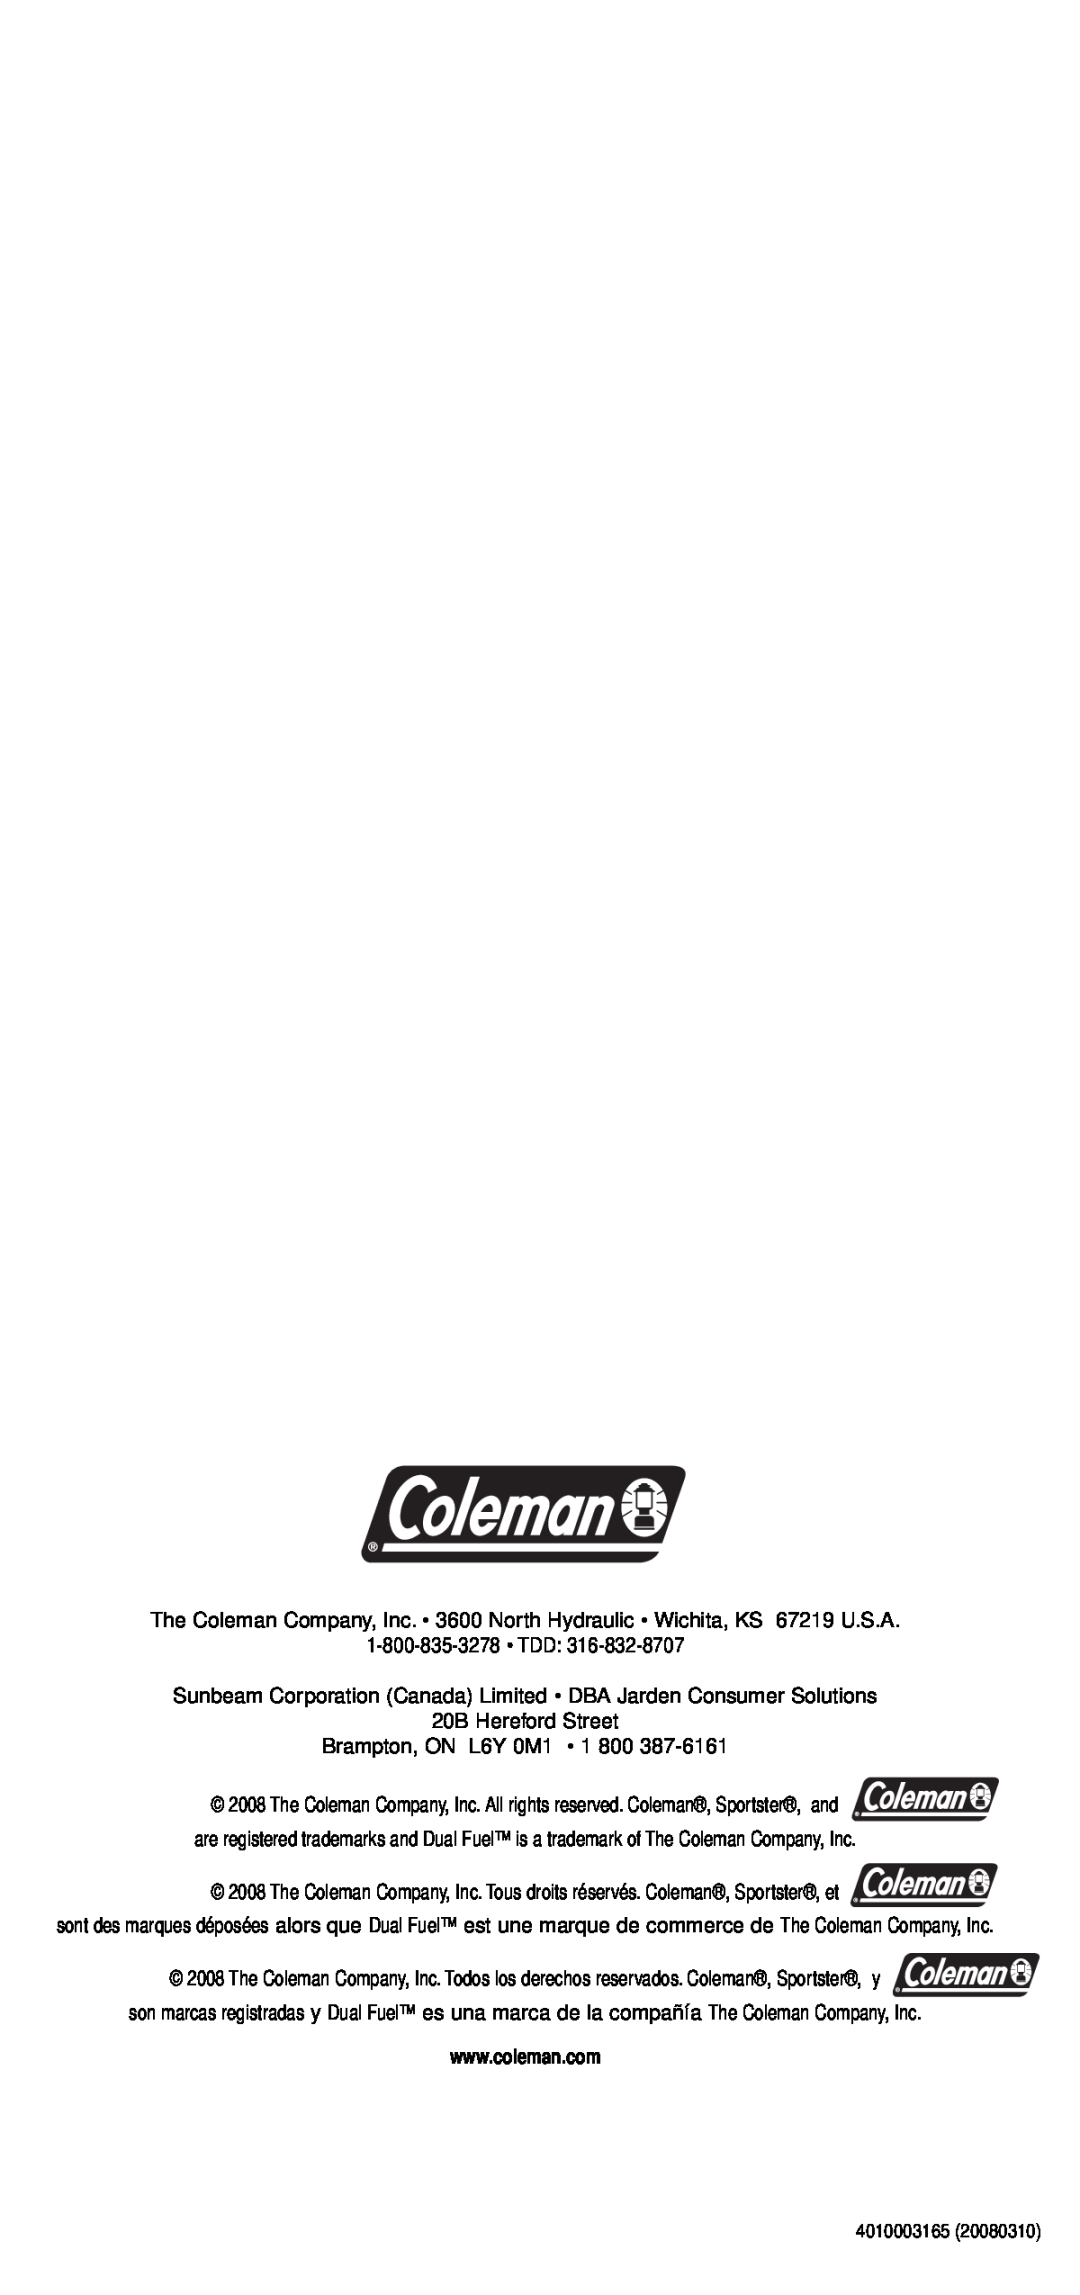 Coleman 533 Series instruction manual Sunbeam Corporation Canada Limited DBA Jarden Consumer Solutions 